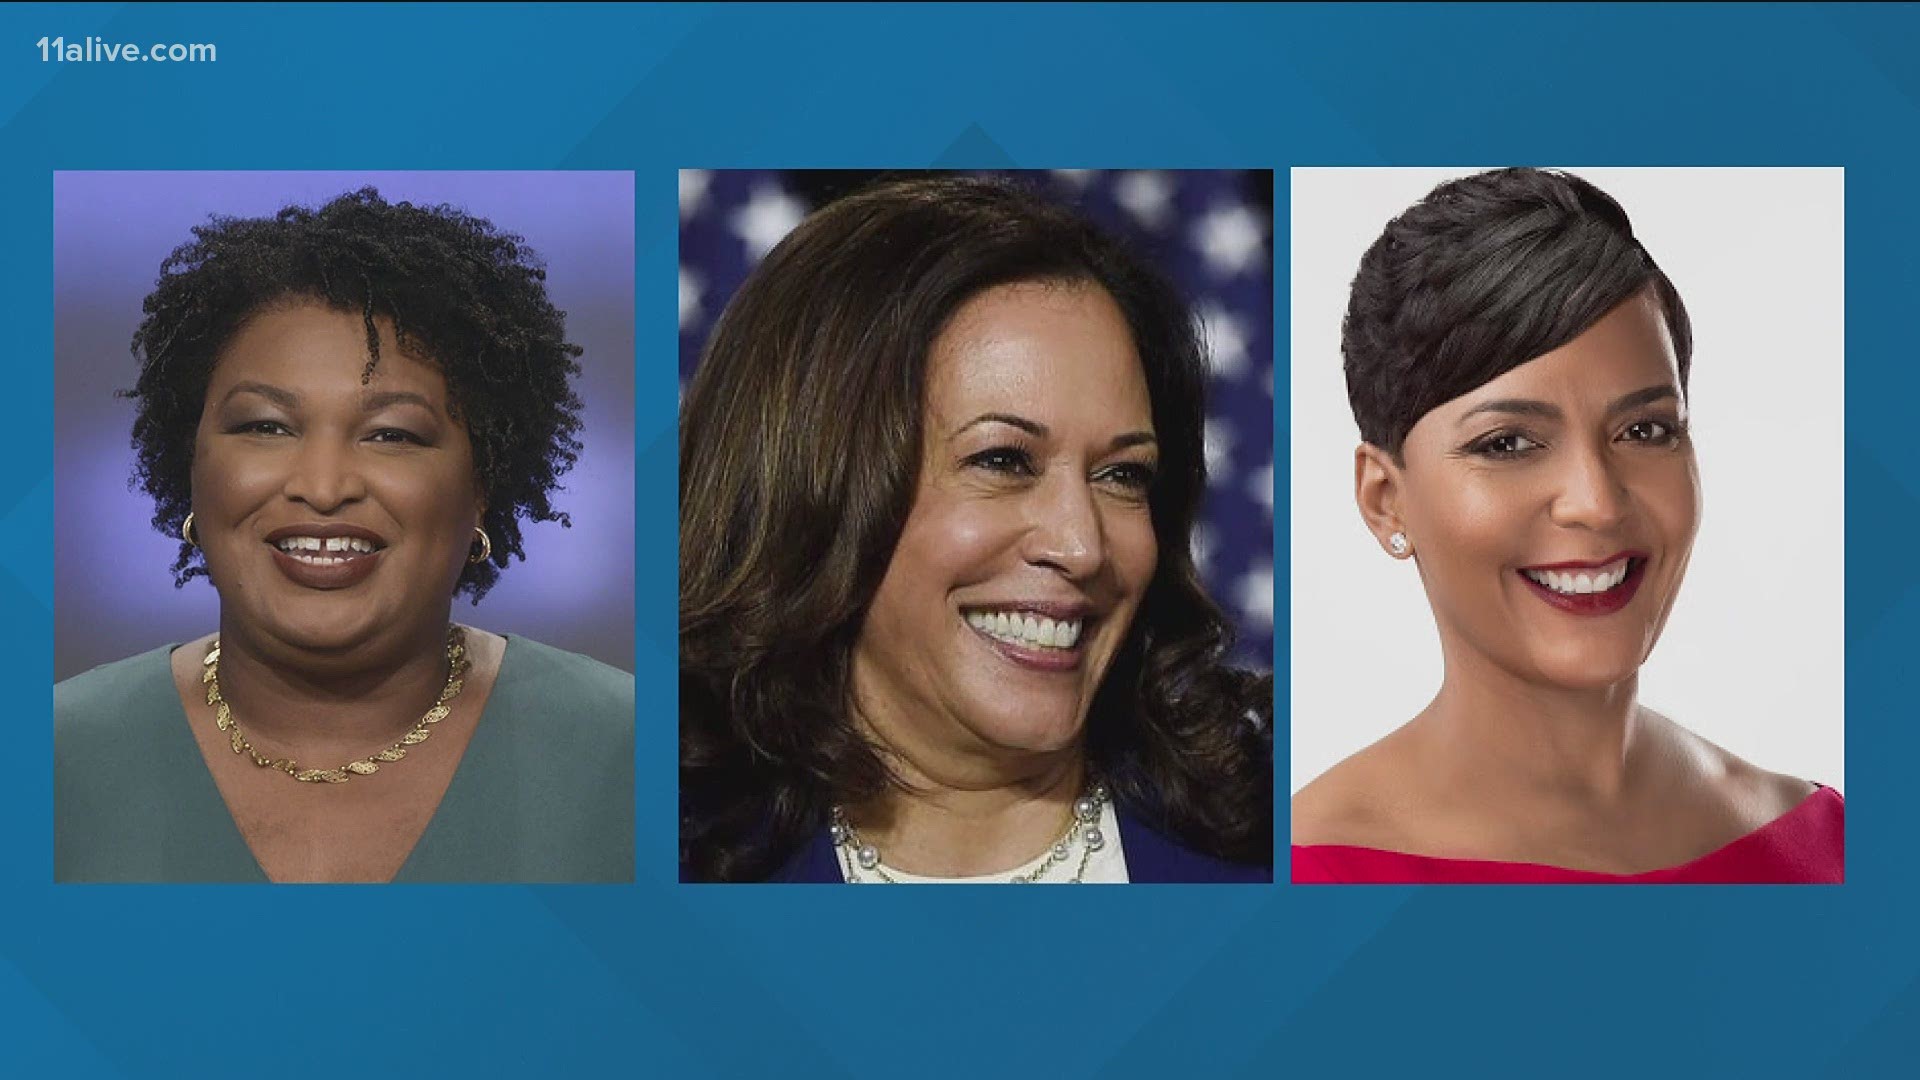 Kamala Harris, Stacey Abrams and Keisha Lance Bottoms each graduated from historically black colleges and universities.